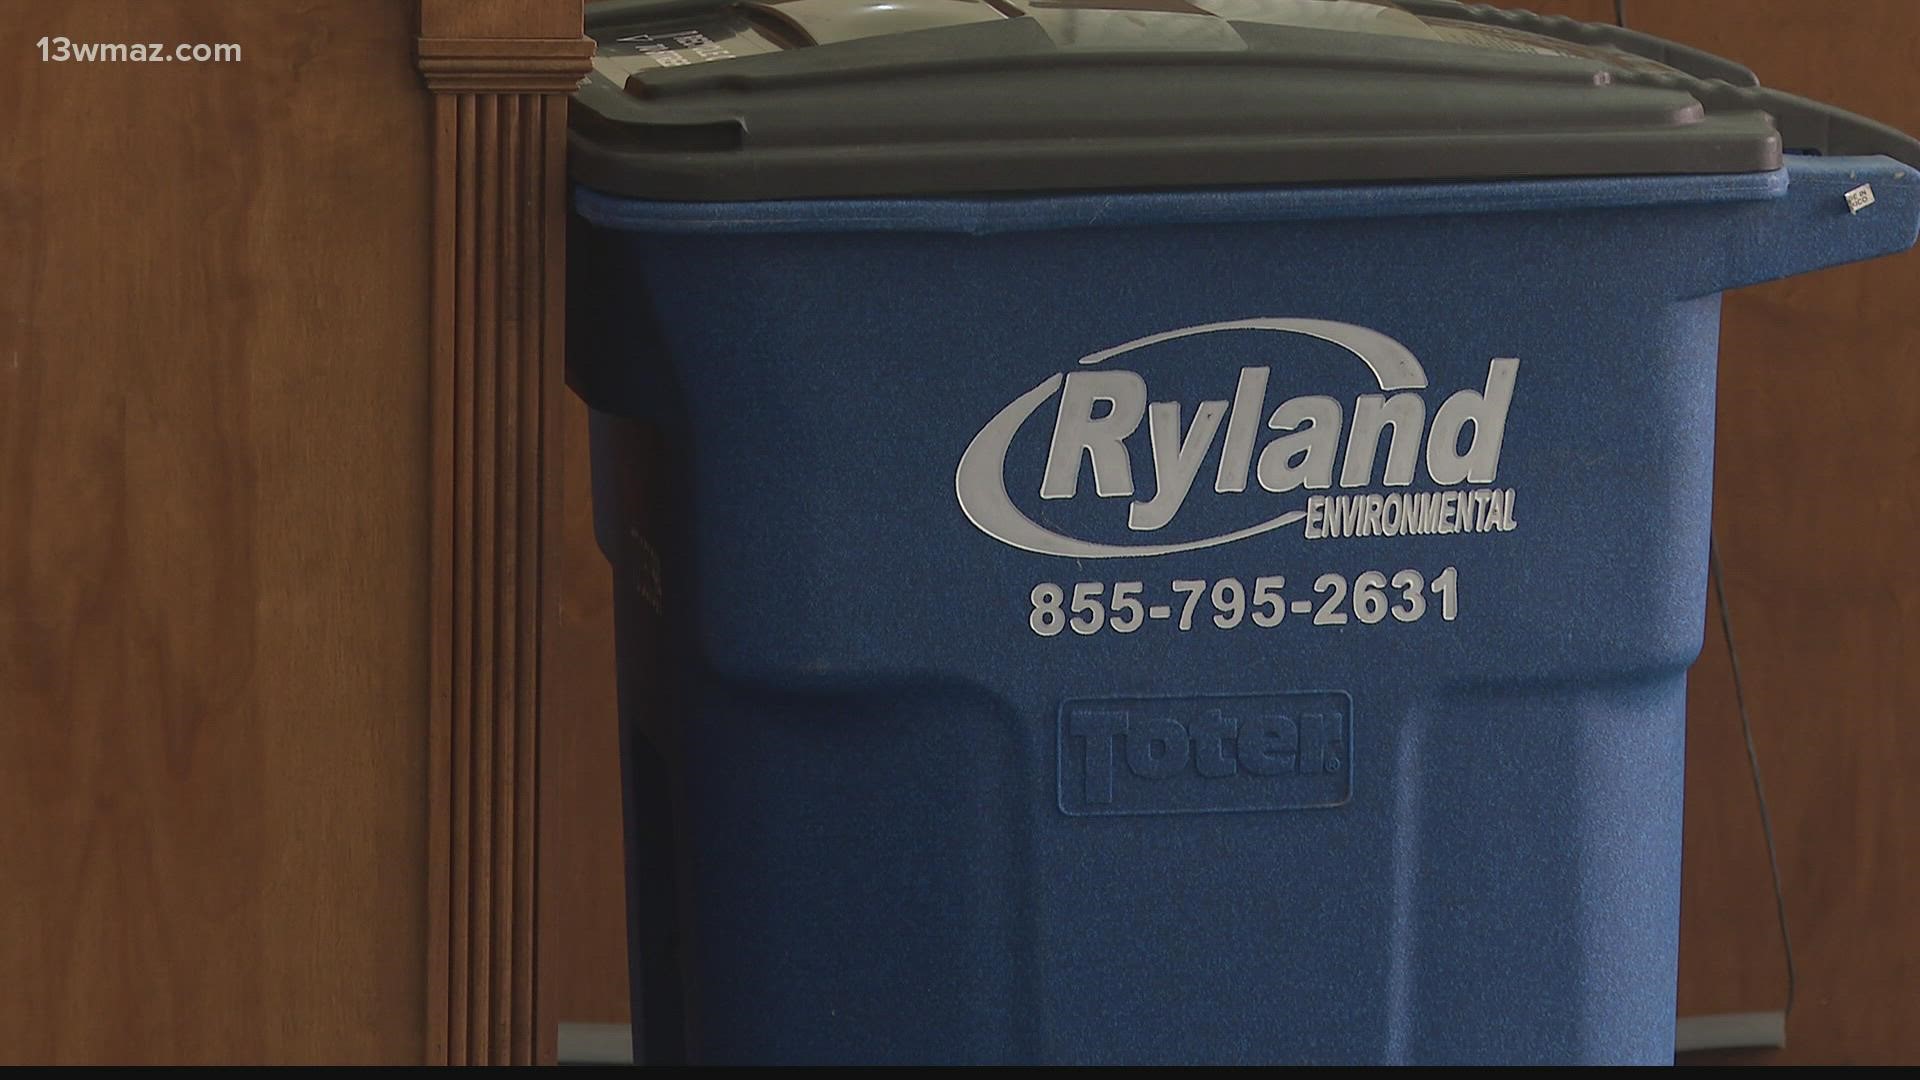 Inside new trash bins coming to your home, in December, you will find instructions and how to sign up for their recycling program.